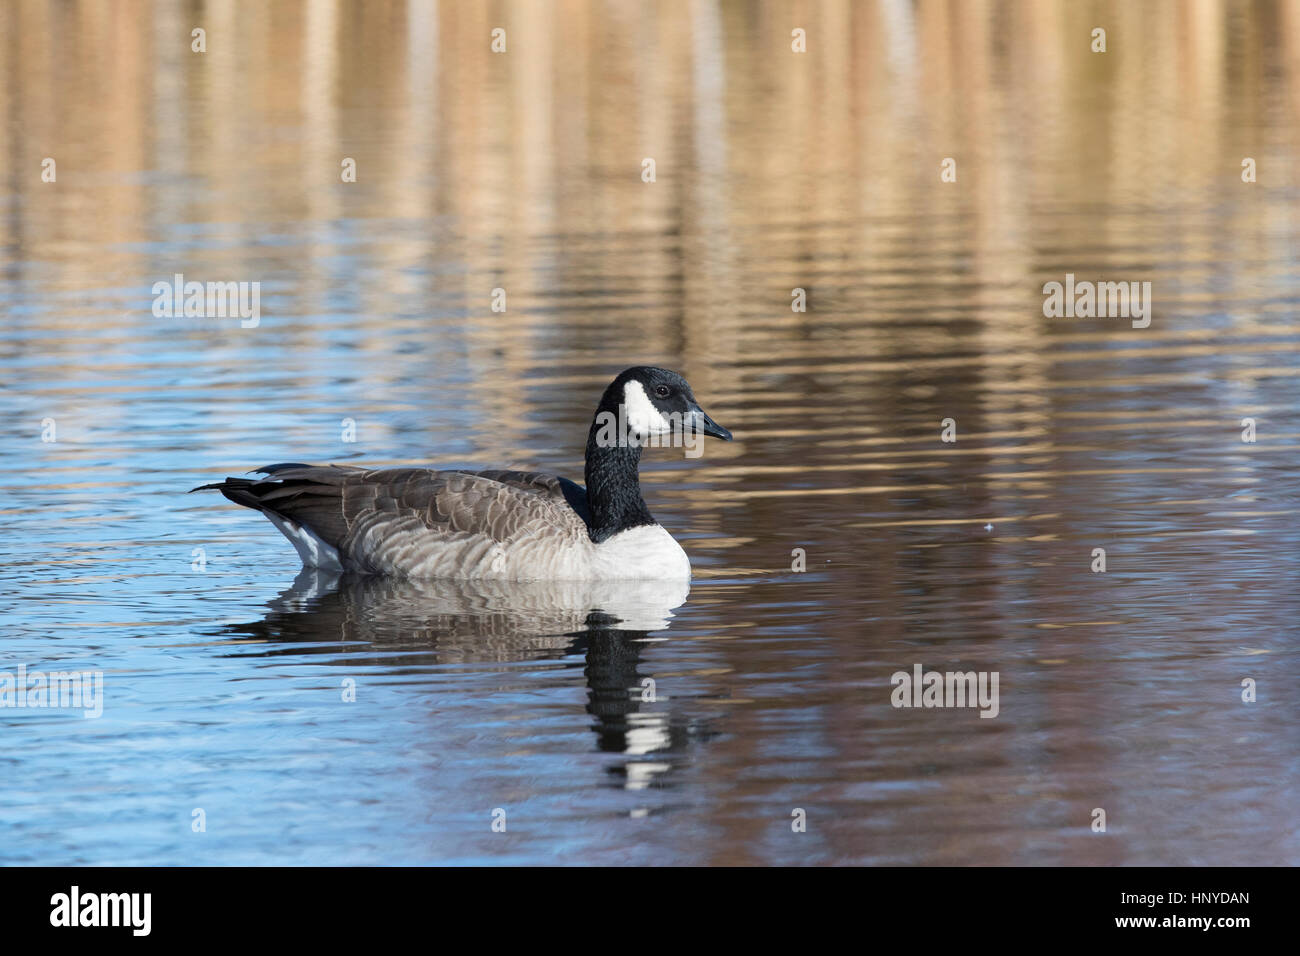 Canada goose swimming on water at National Elk Refuge Stock Photo